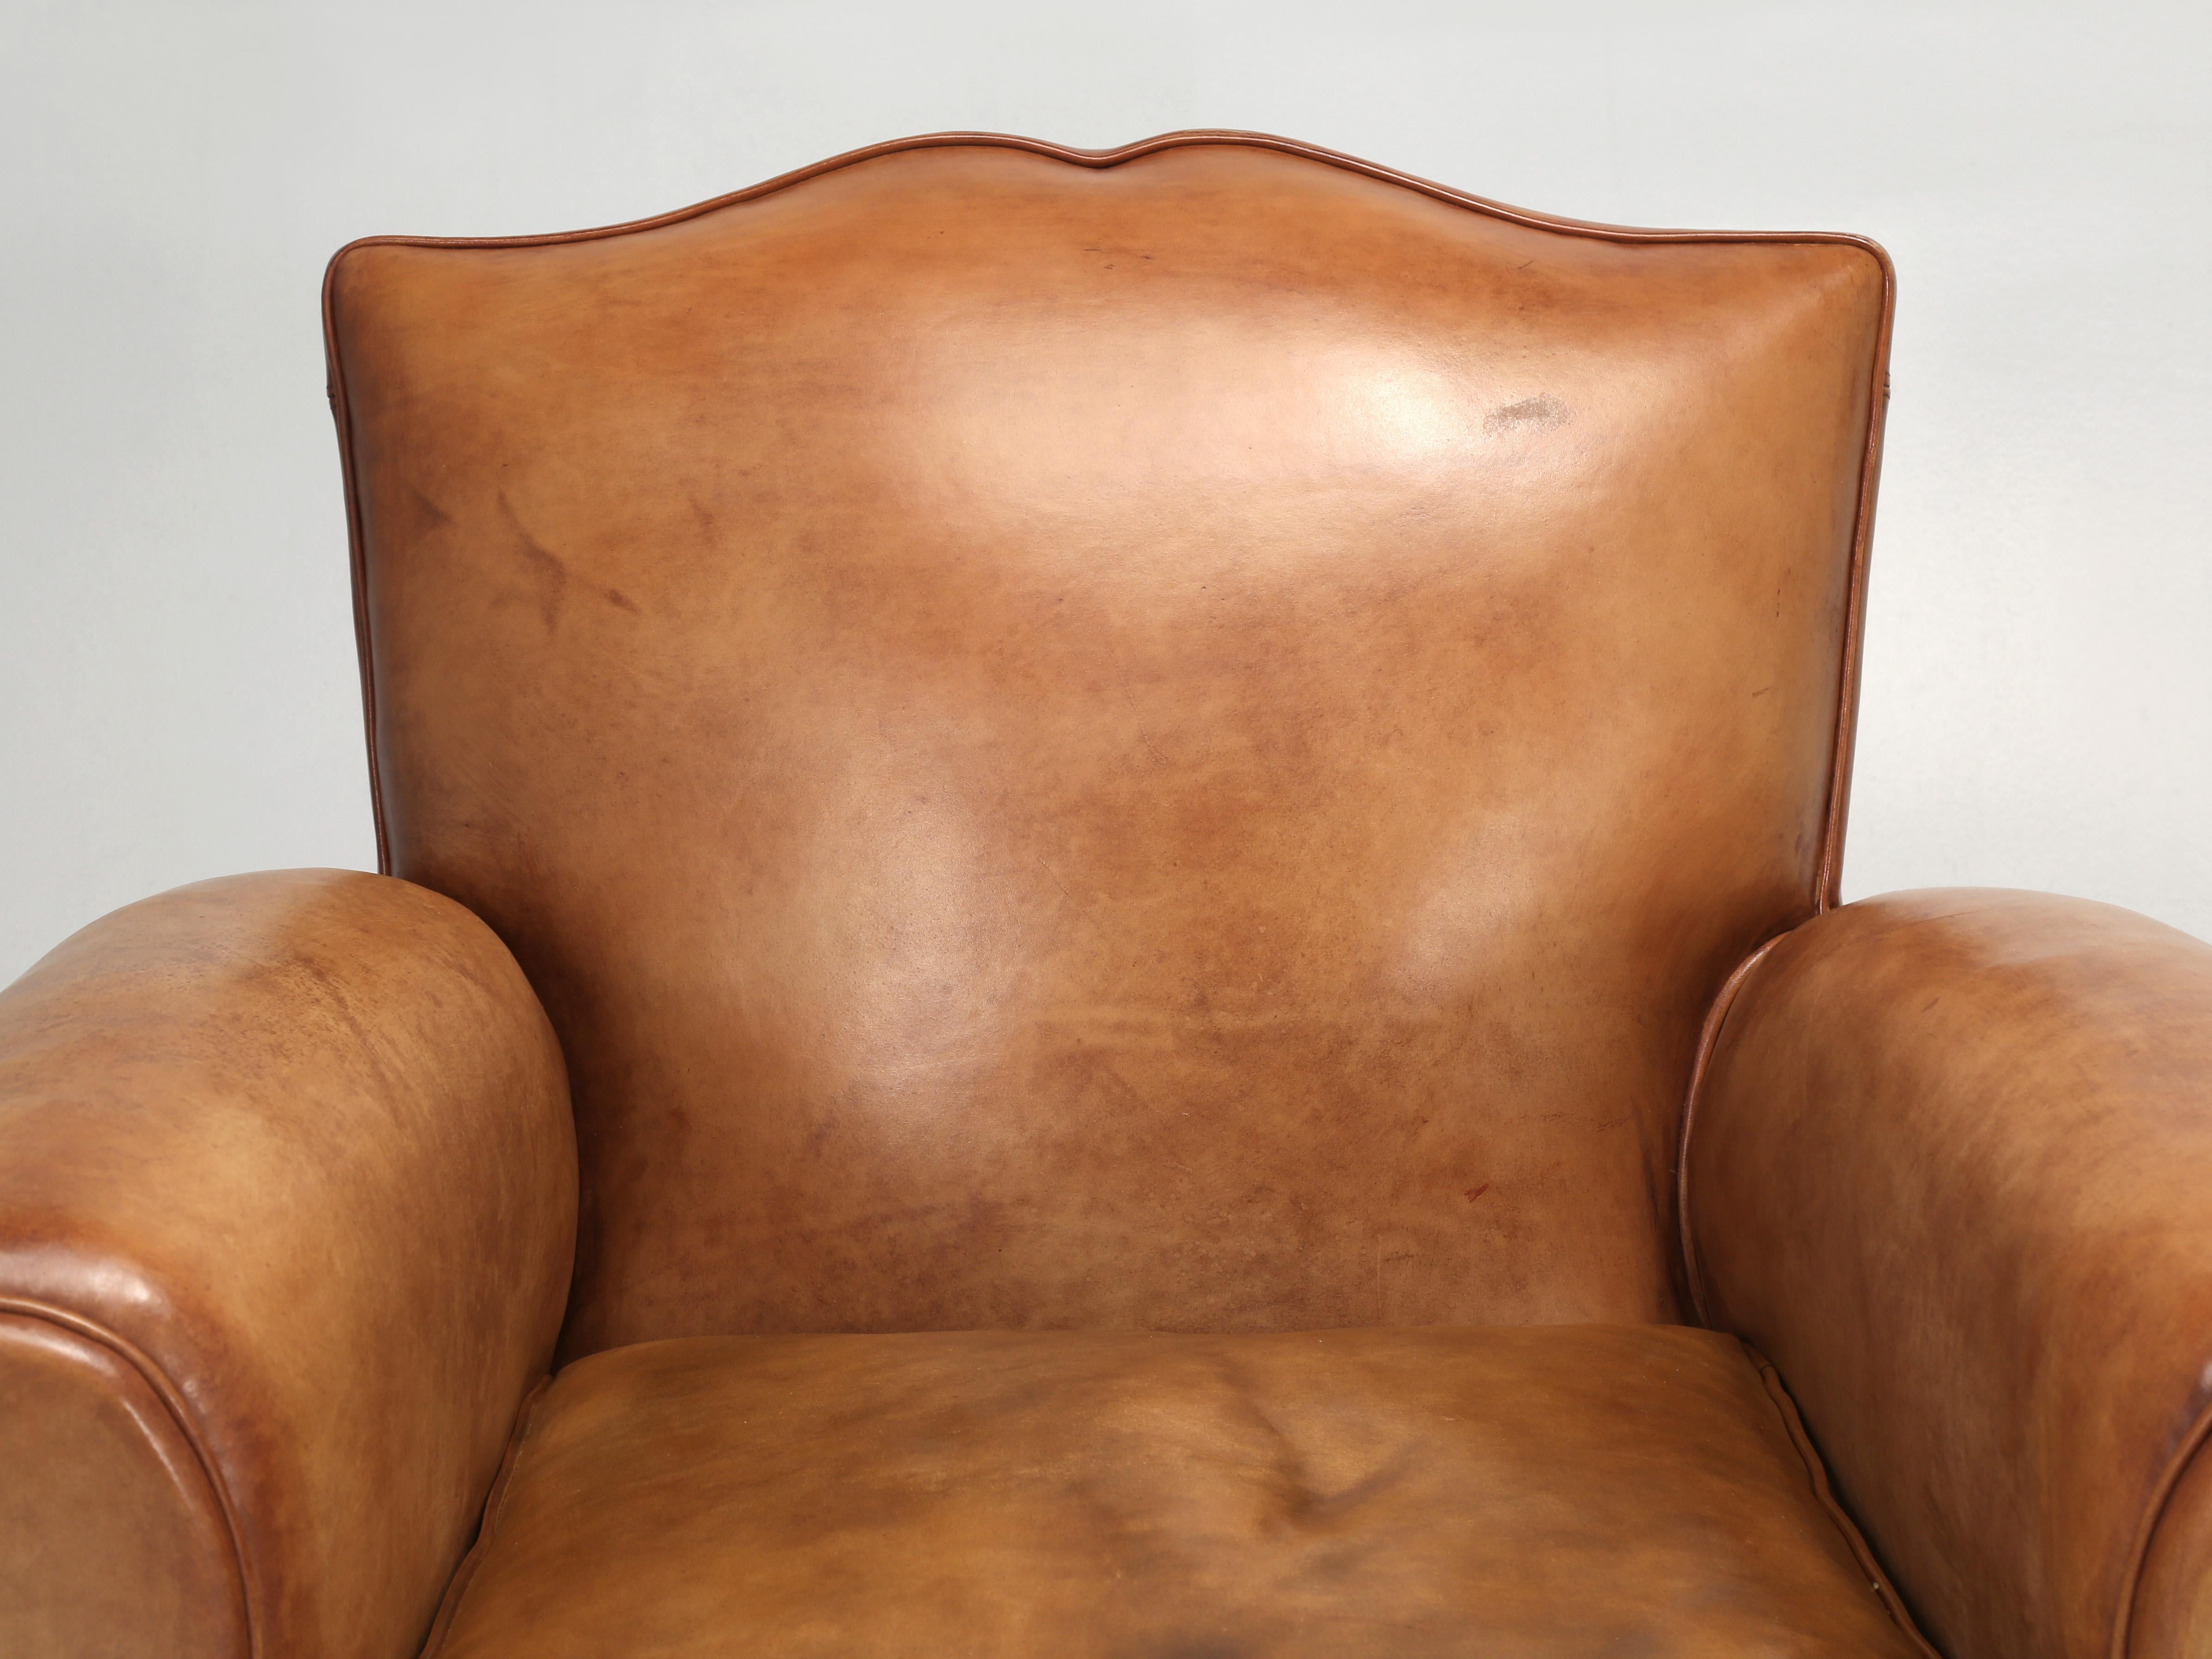 Art Deco French Leather Club Chairs Completely Restored Horsehair Padding New Leather 